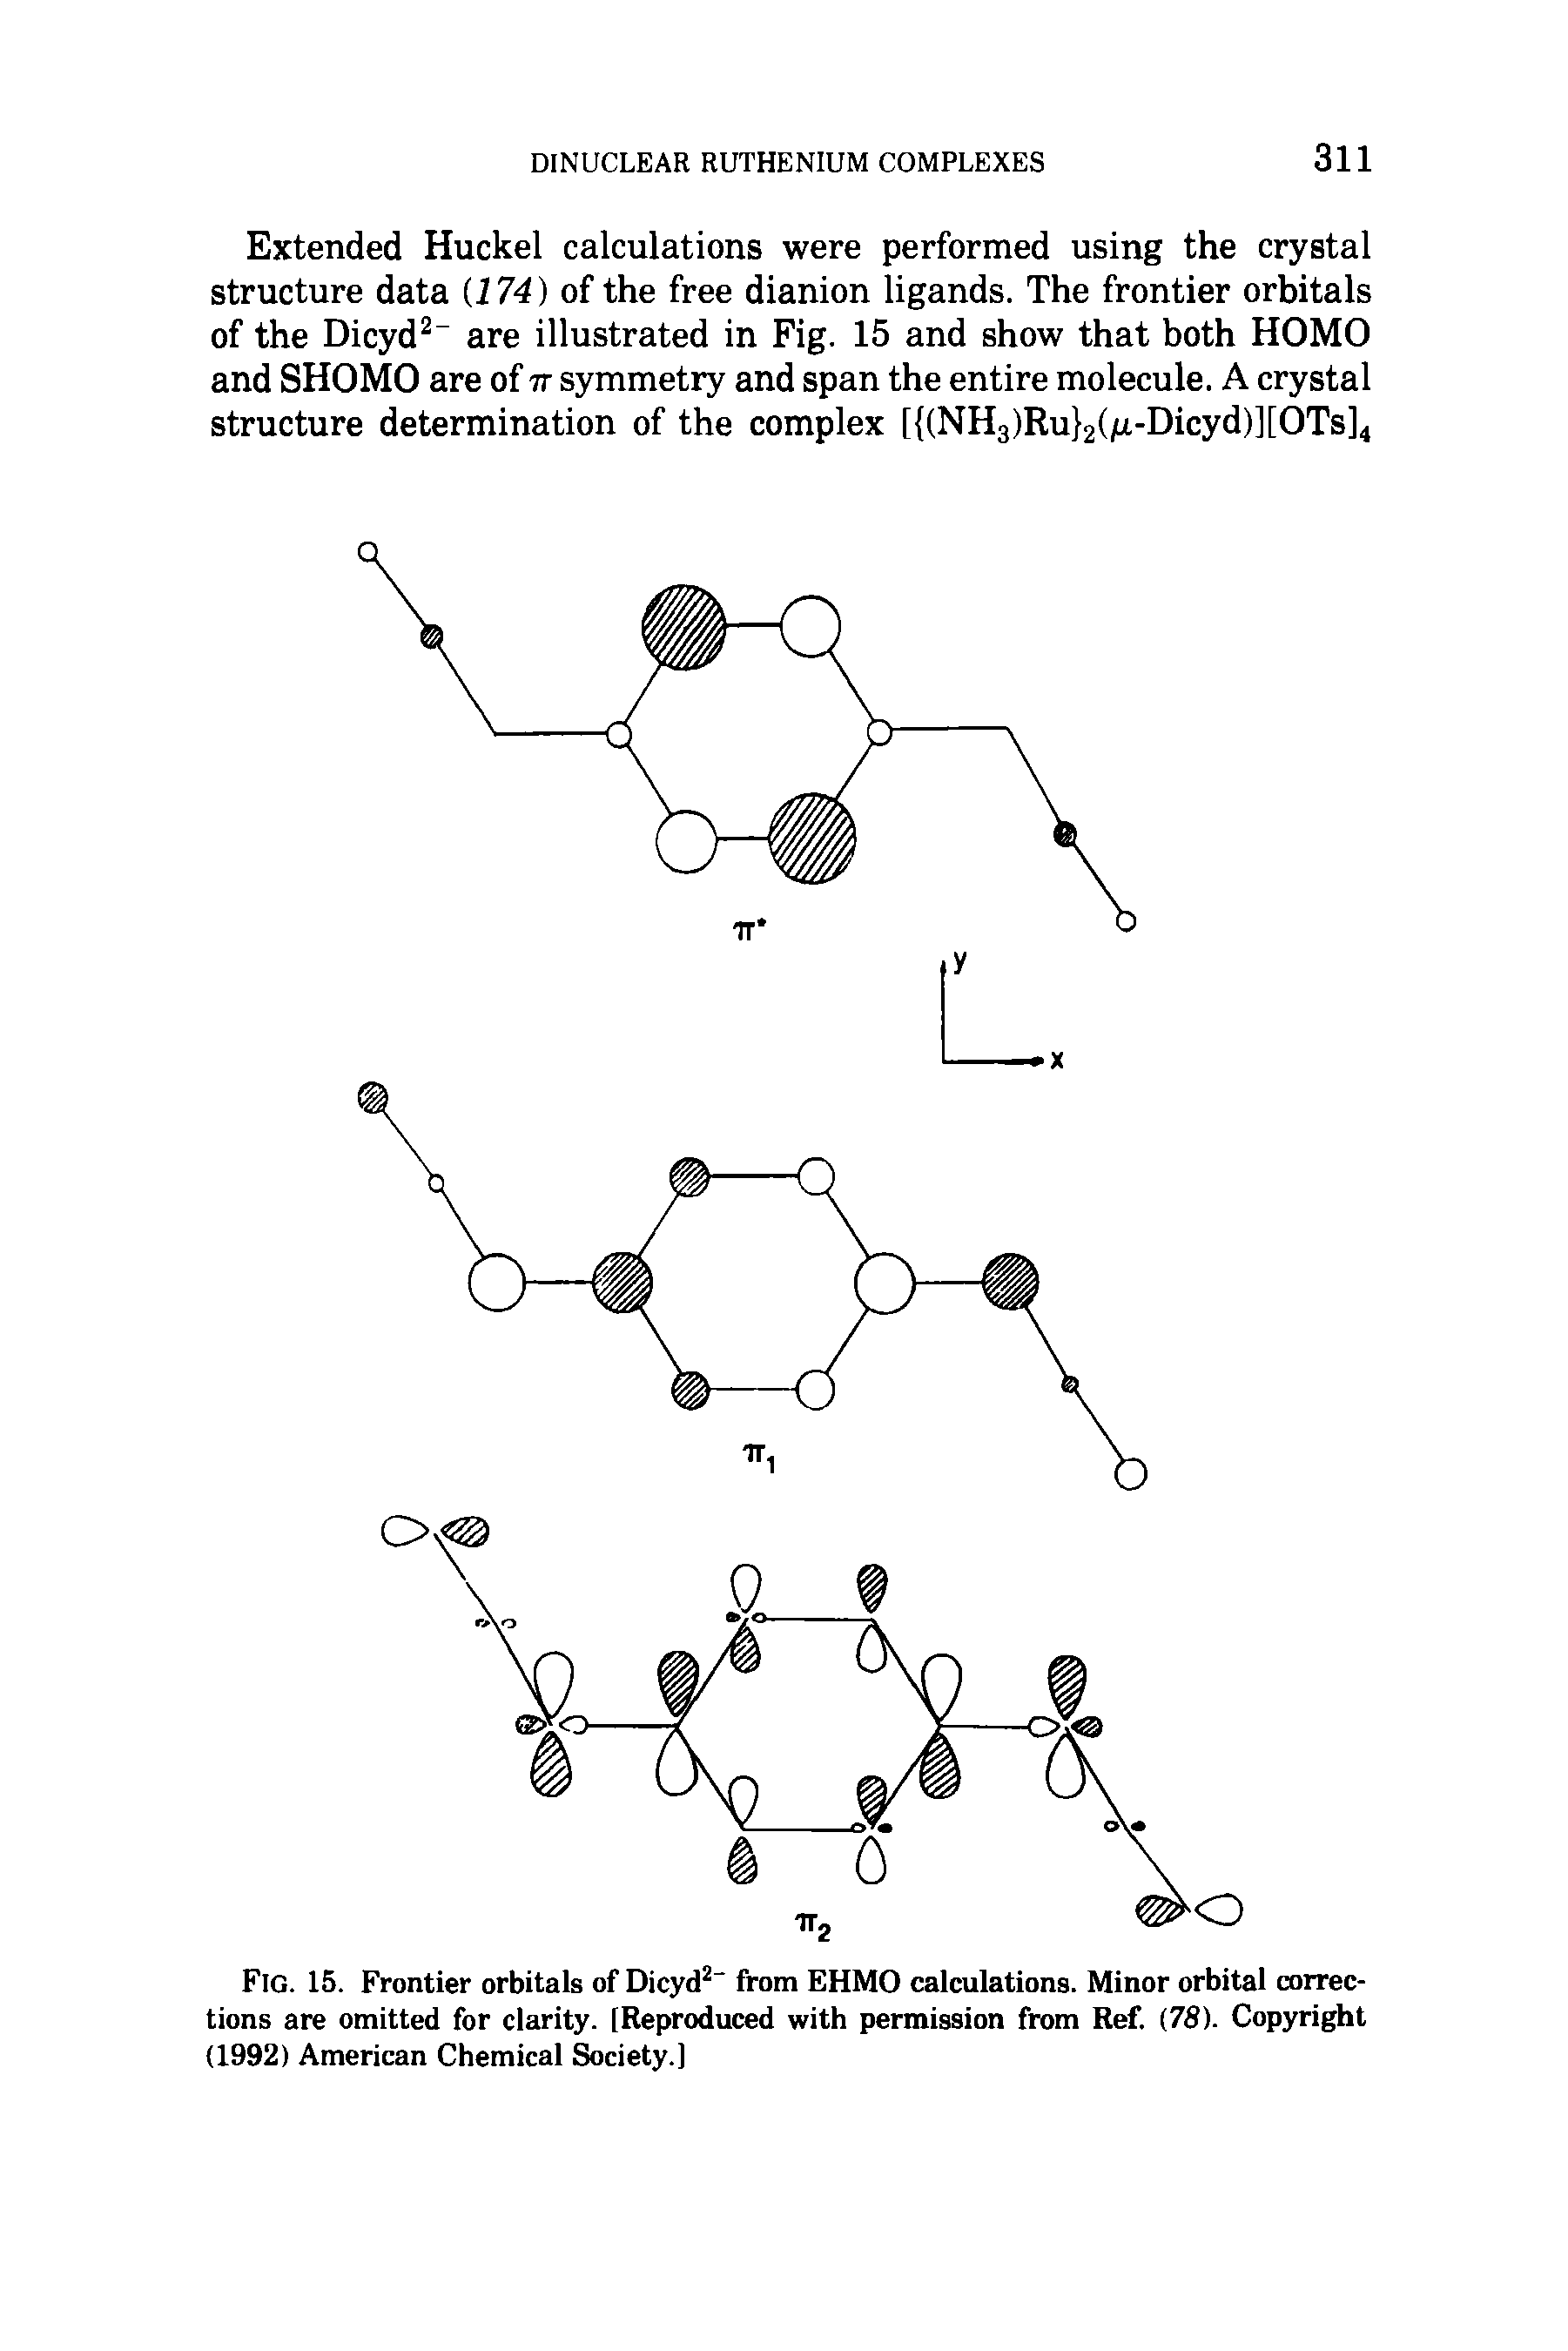 Fig. 15. Frontier orbitals of Dicyd2- from EHMO calculations. Minor orbital corrections are omitted for clarity. [Reproduced with permission from Ref. (78). Copyright (1992) American Chemical Society.]...